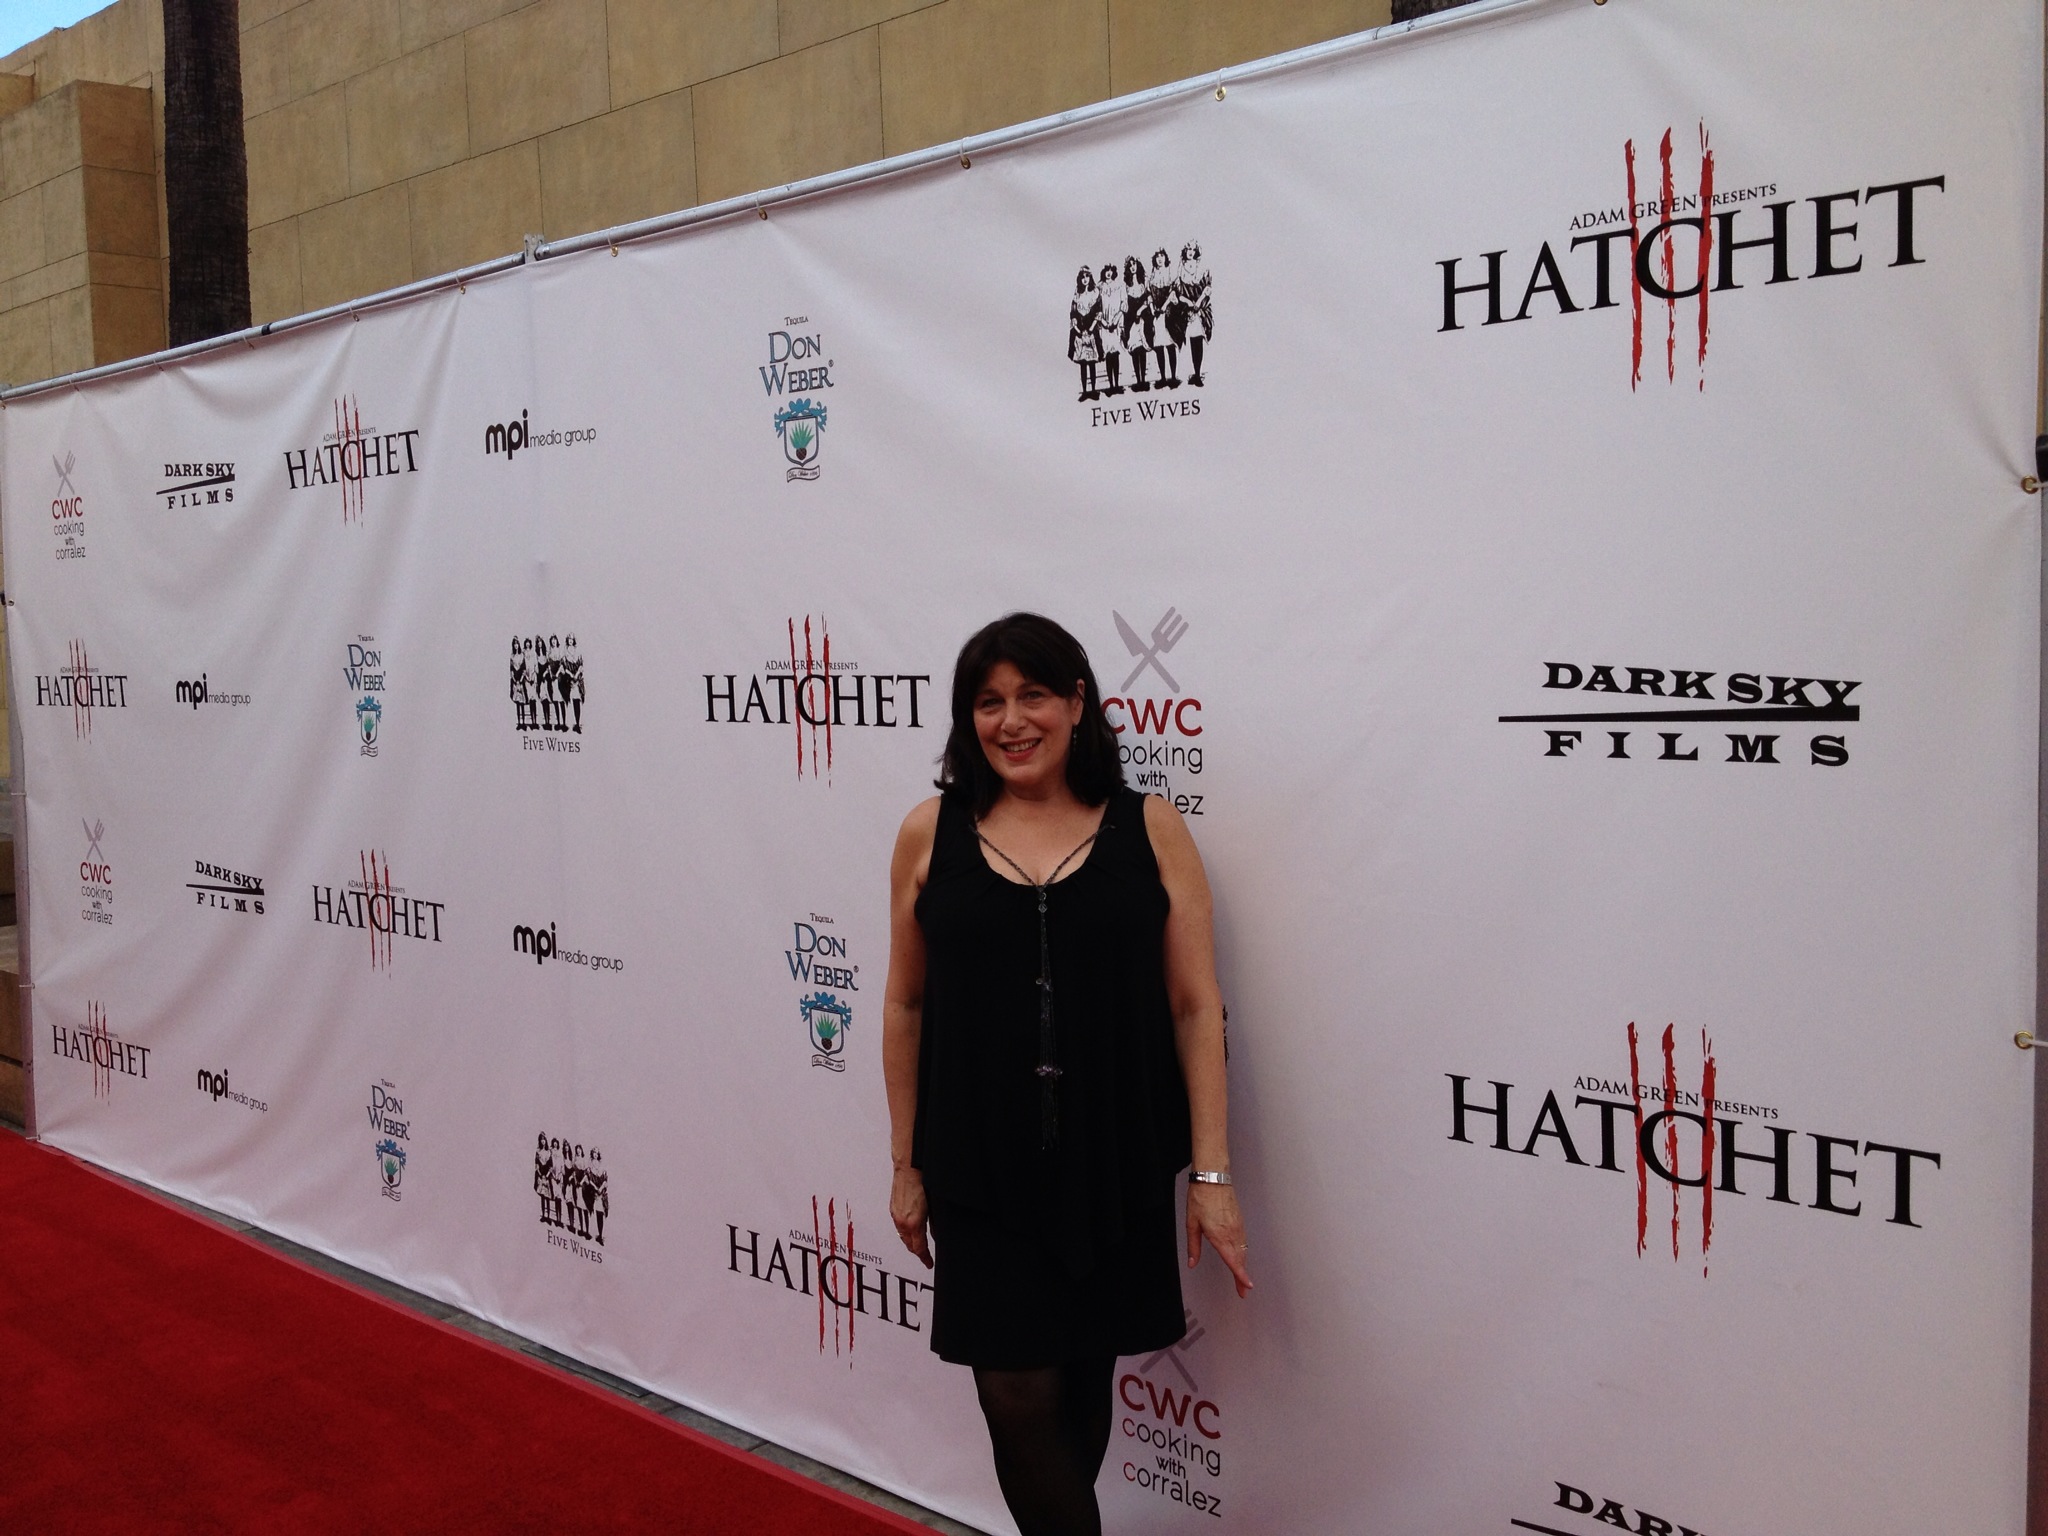 Red Carpet work for feature film premiere.